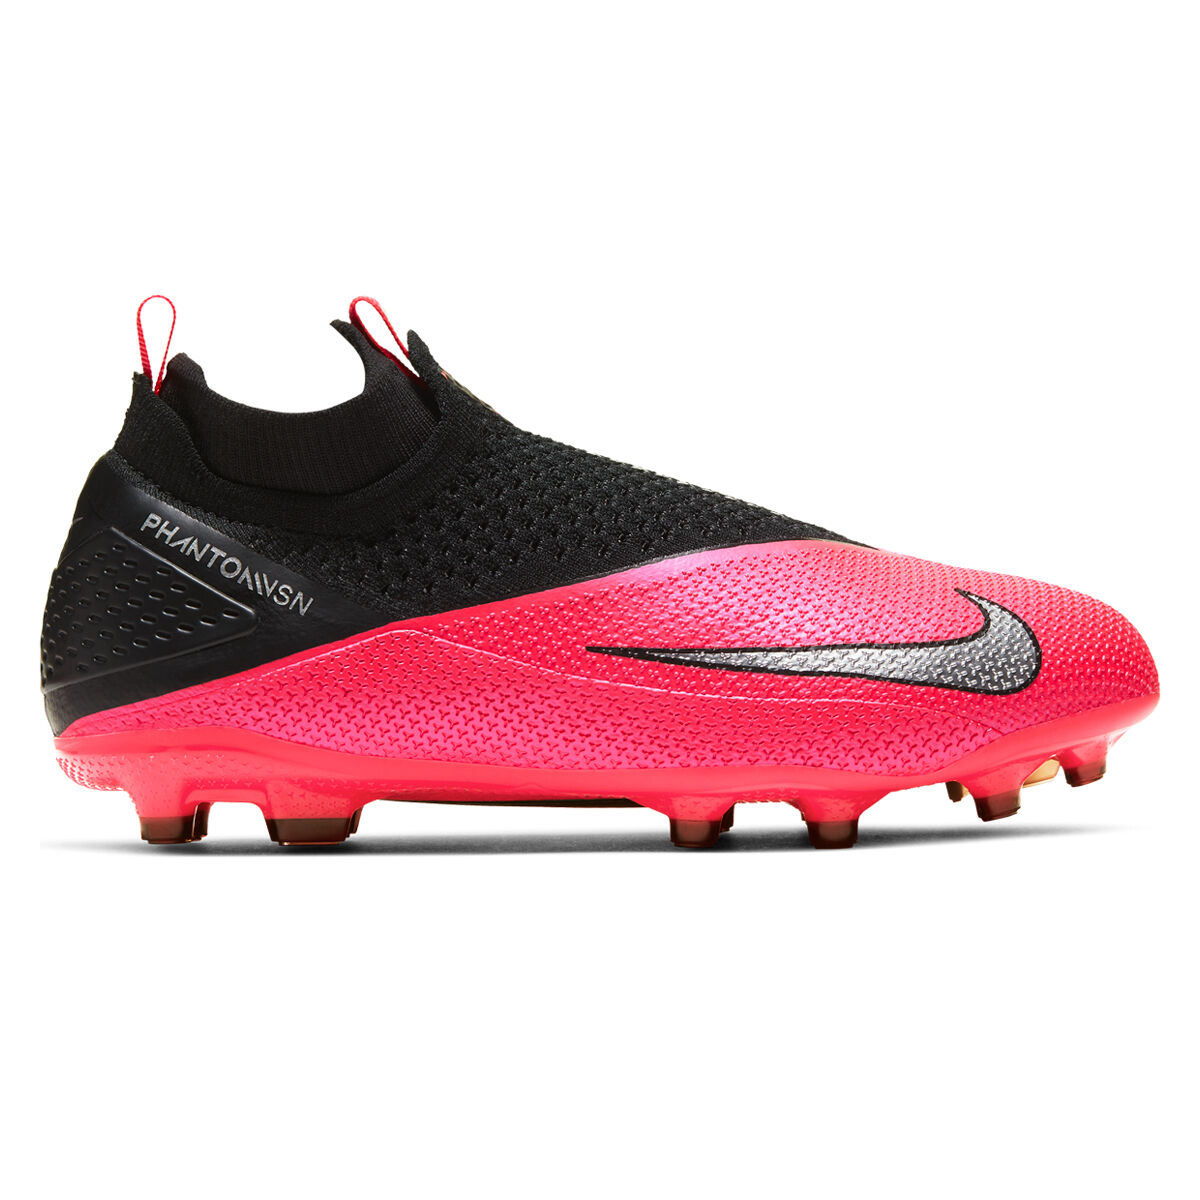 Phantom Vision Elite Dynamic Fit Firm Ground Soccer Cleat .